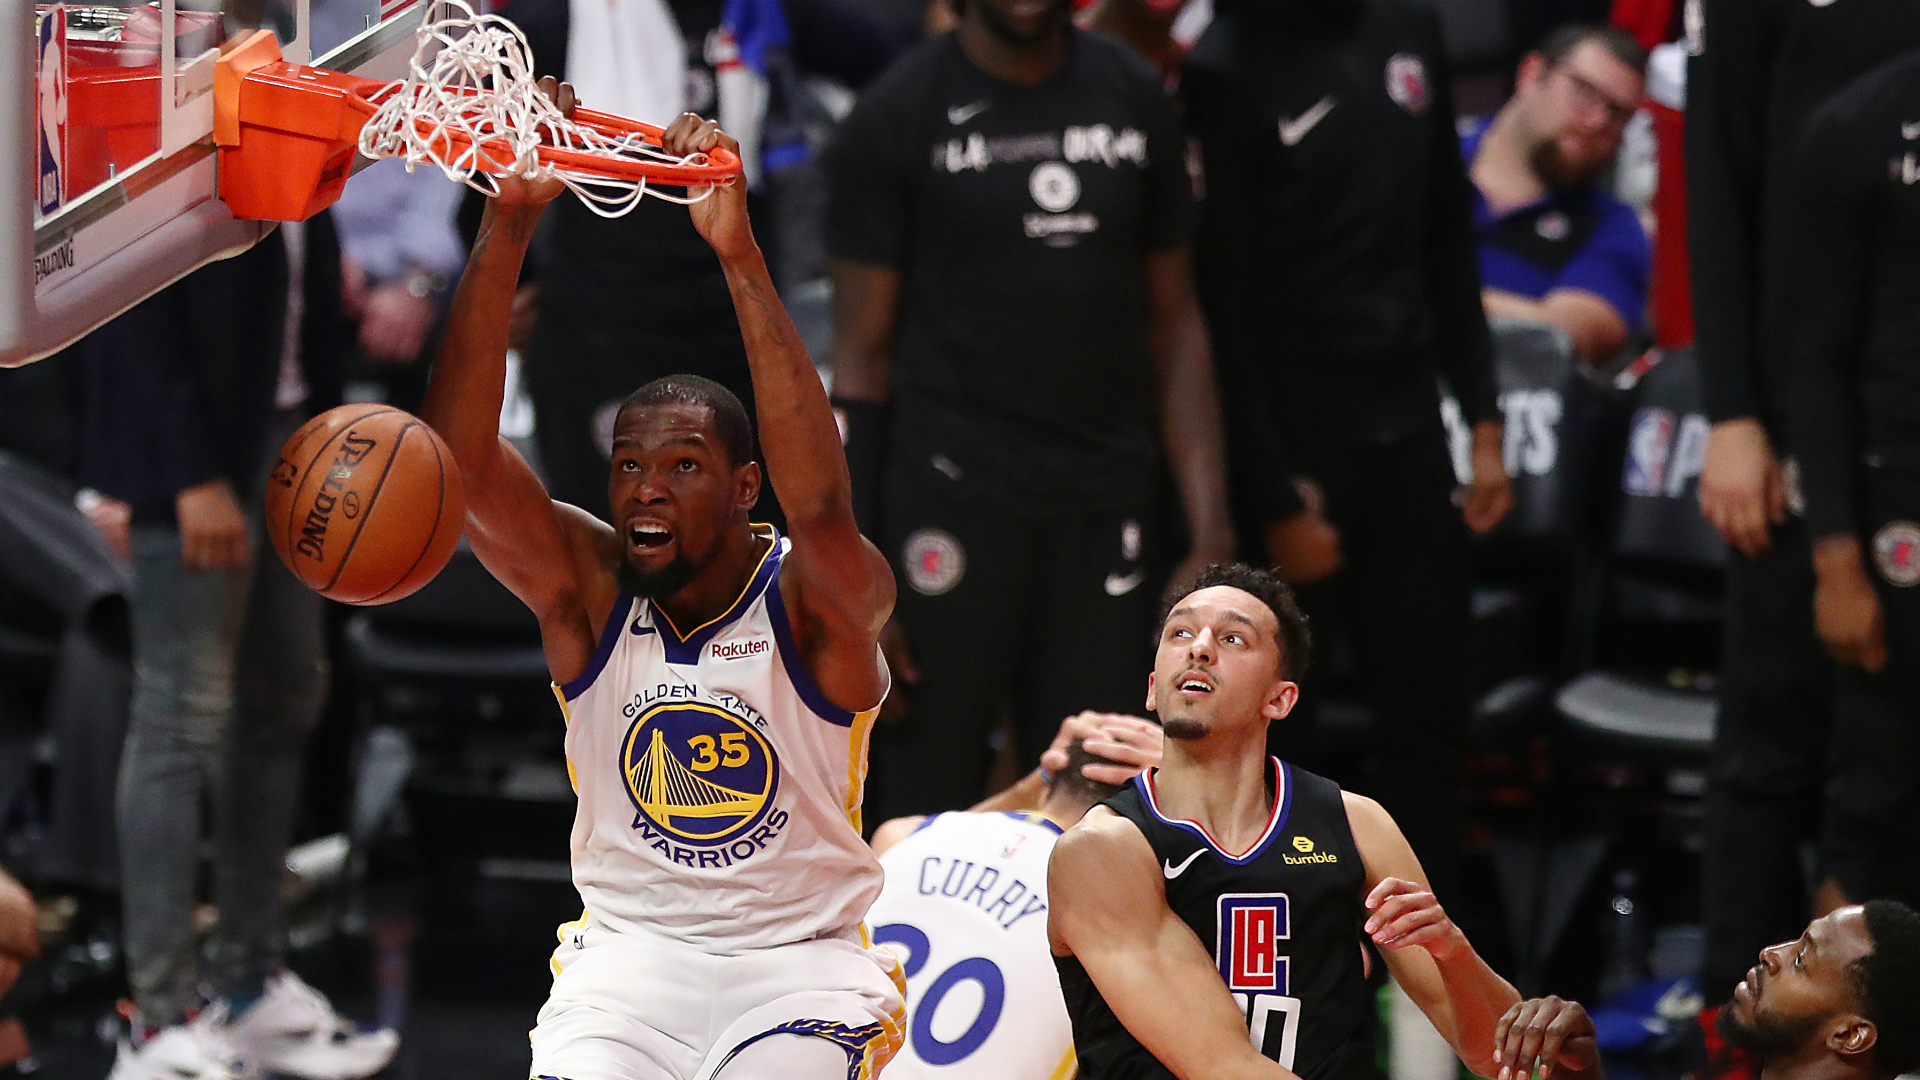 The Golden State Warriors and Portland Trail Blazers hold 3-1 leads over the Los Angeles Clippers and Oklahoma City Thunder respectively.